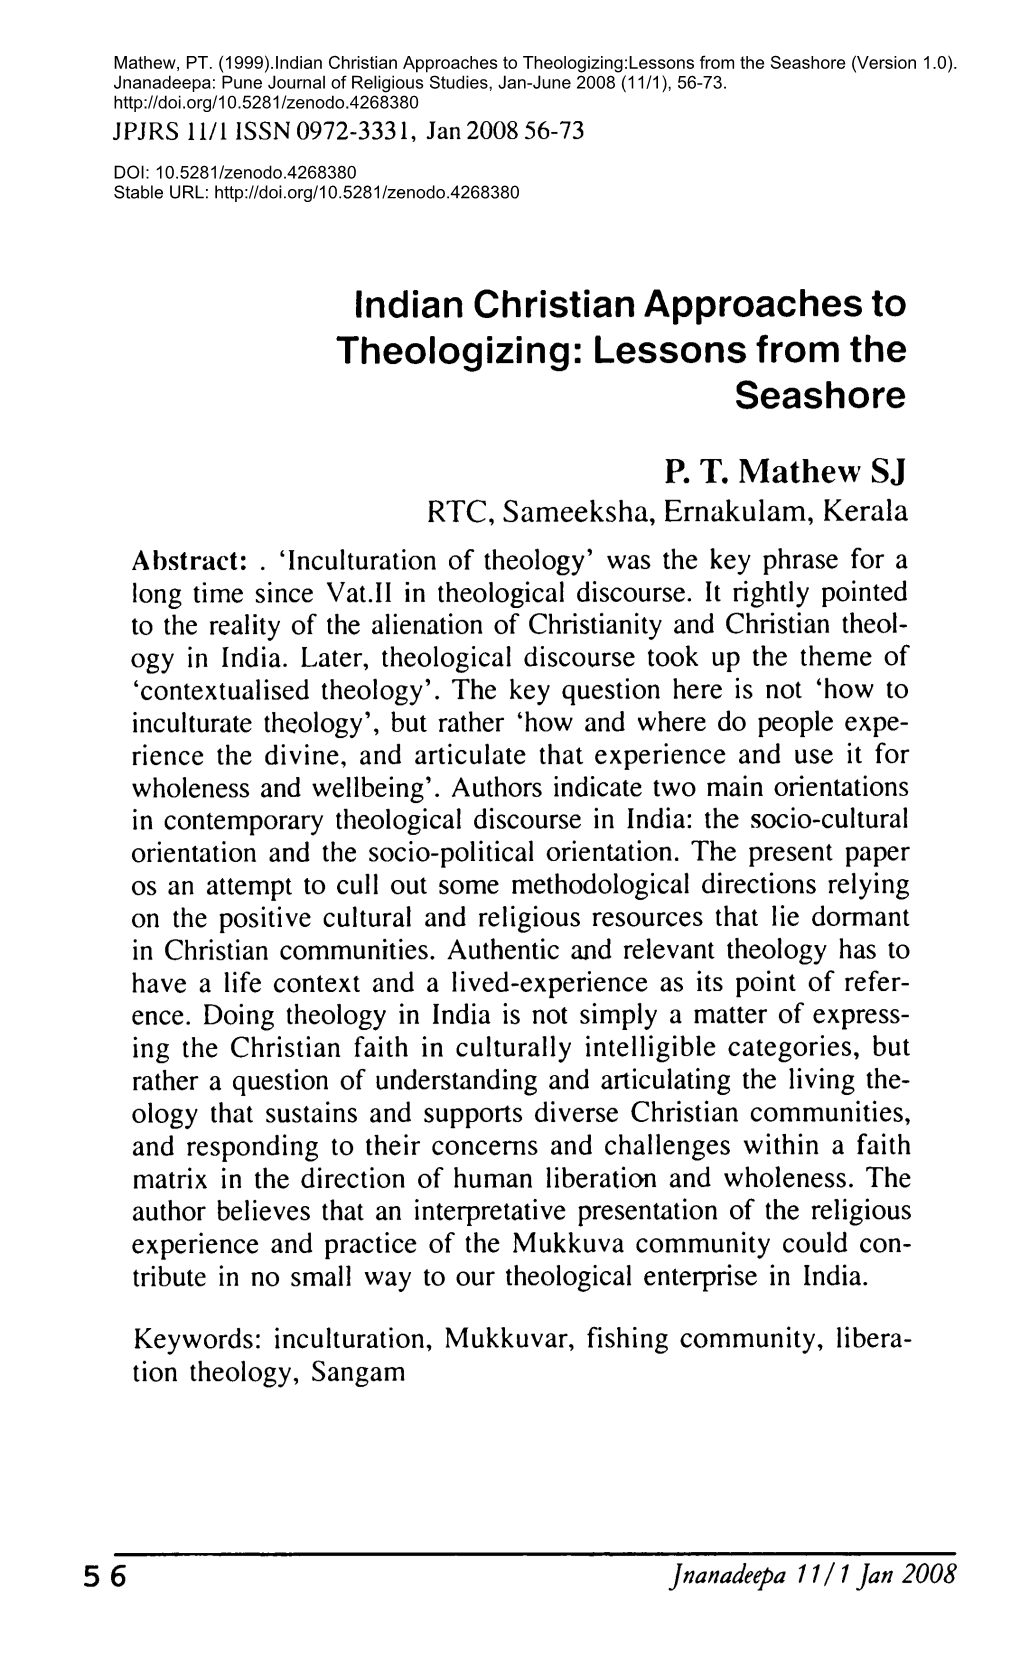 Indian Christian Approaches to Theologizing: Lessons from the Seashore